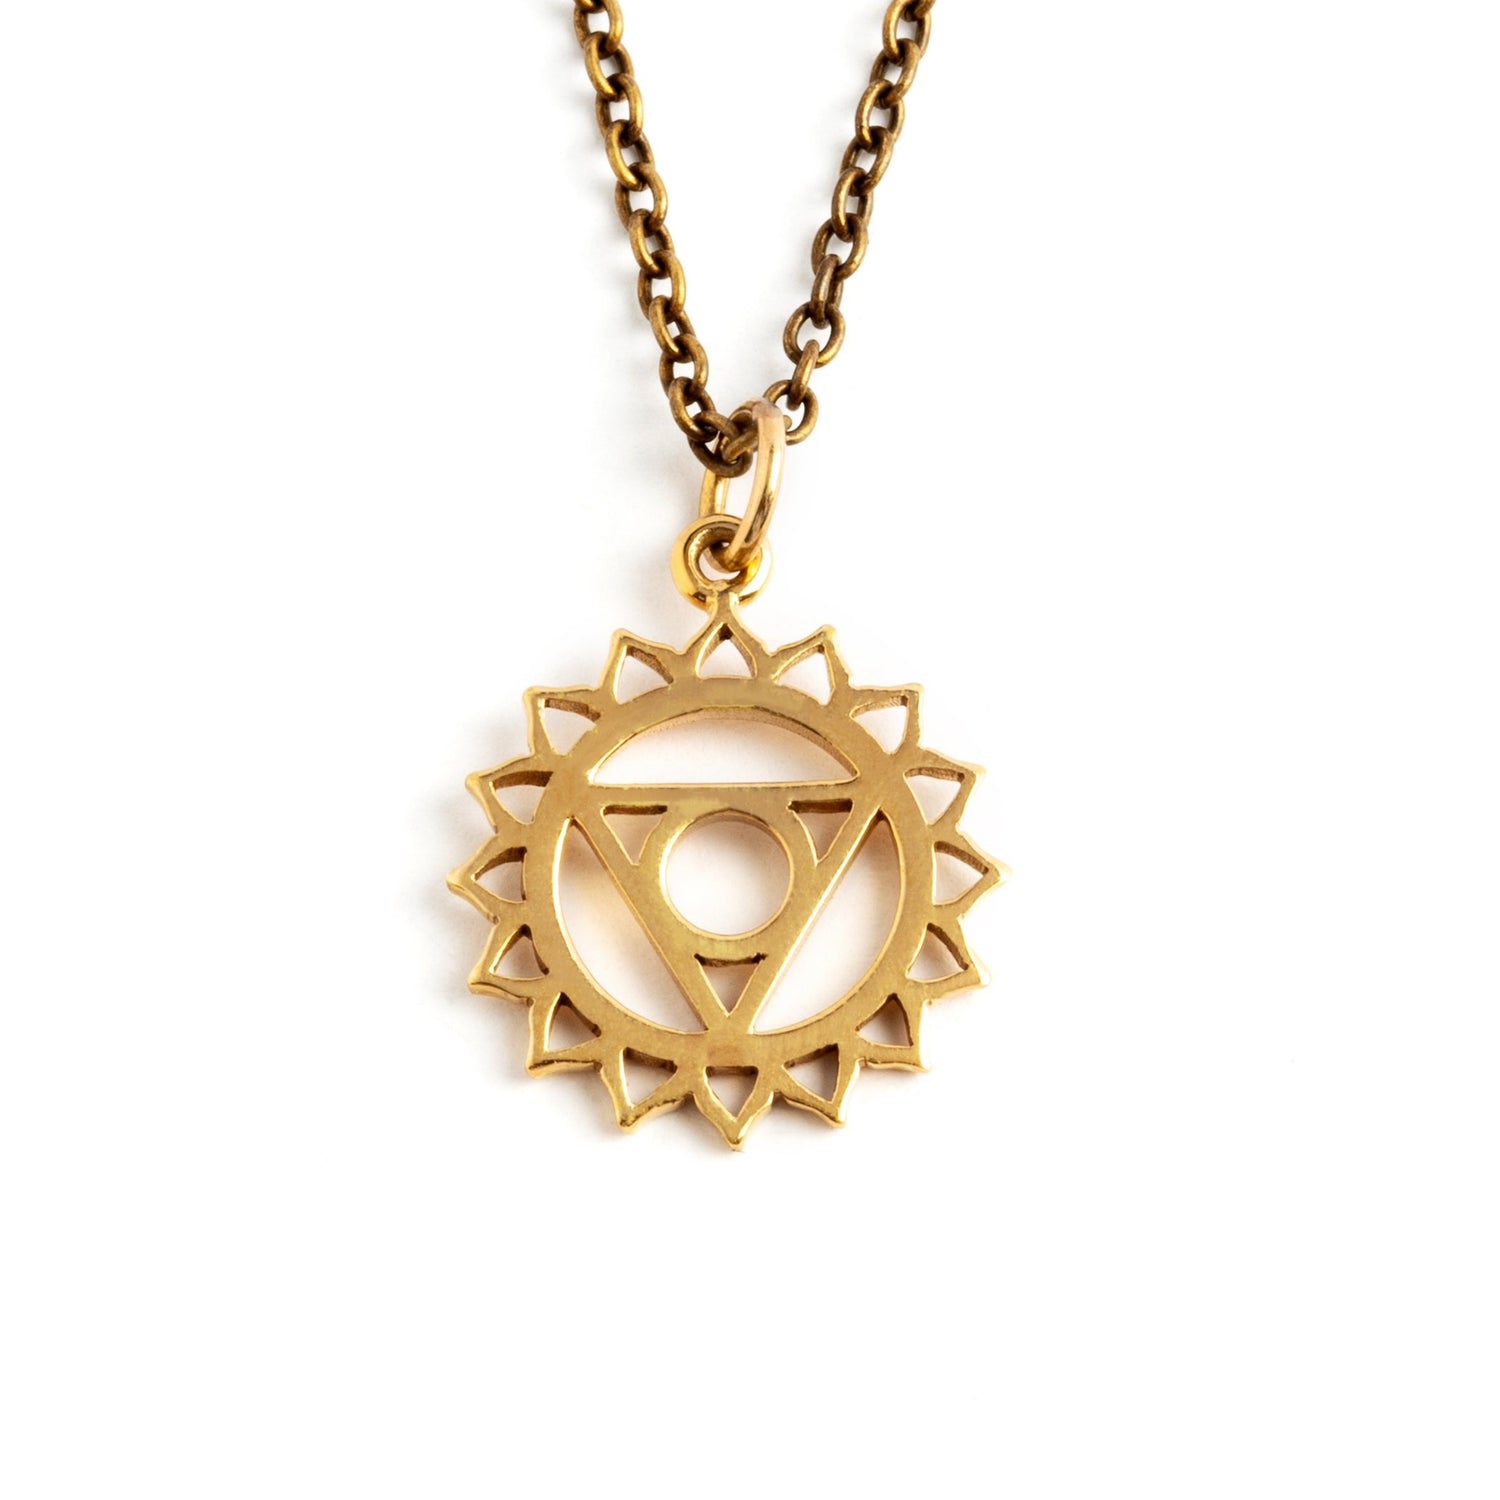 Throat Chakra Charm in bronze frontal view